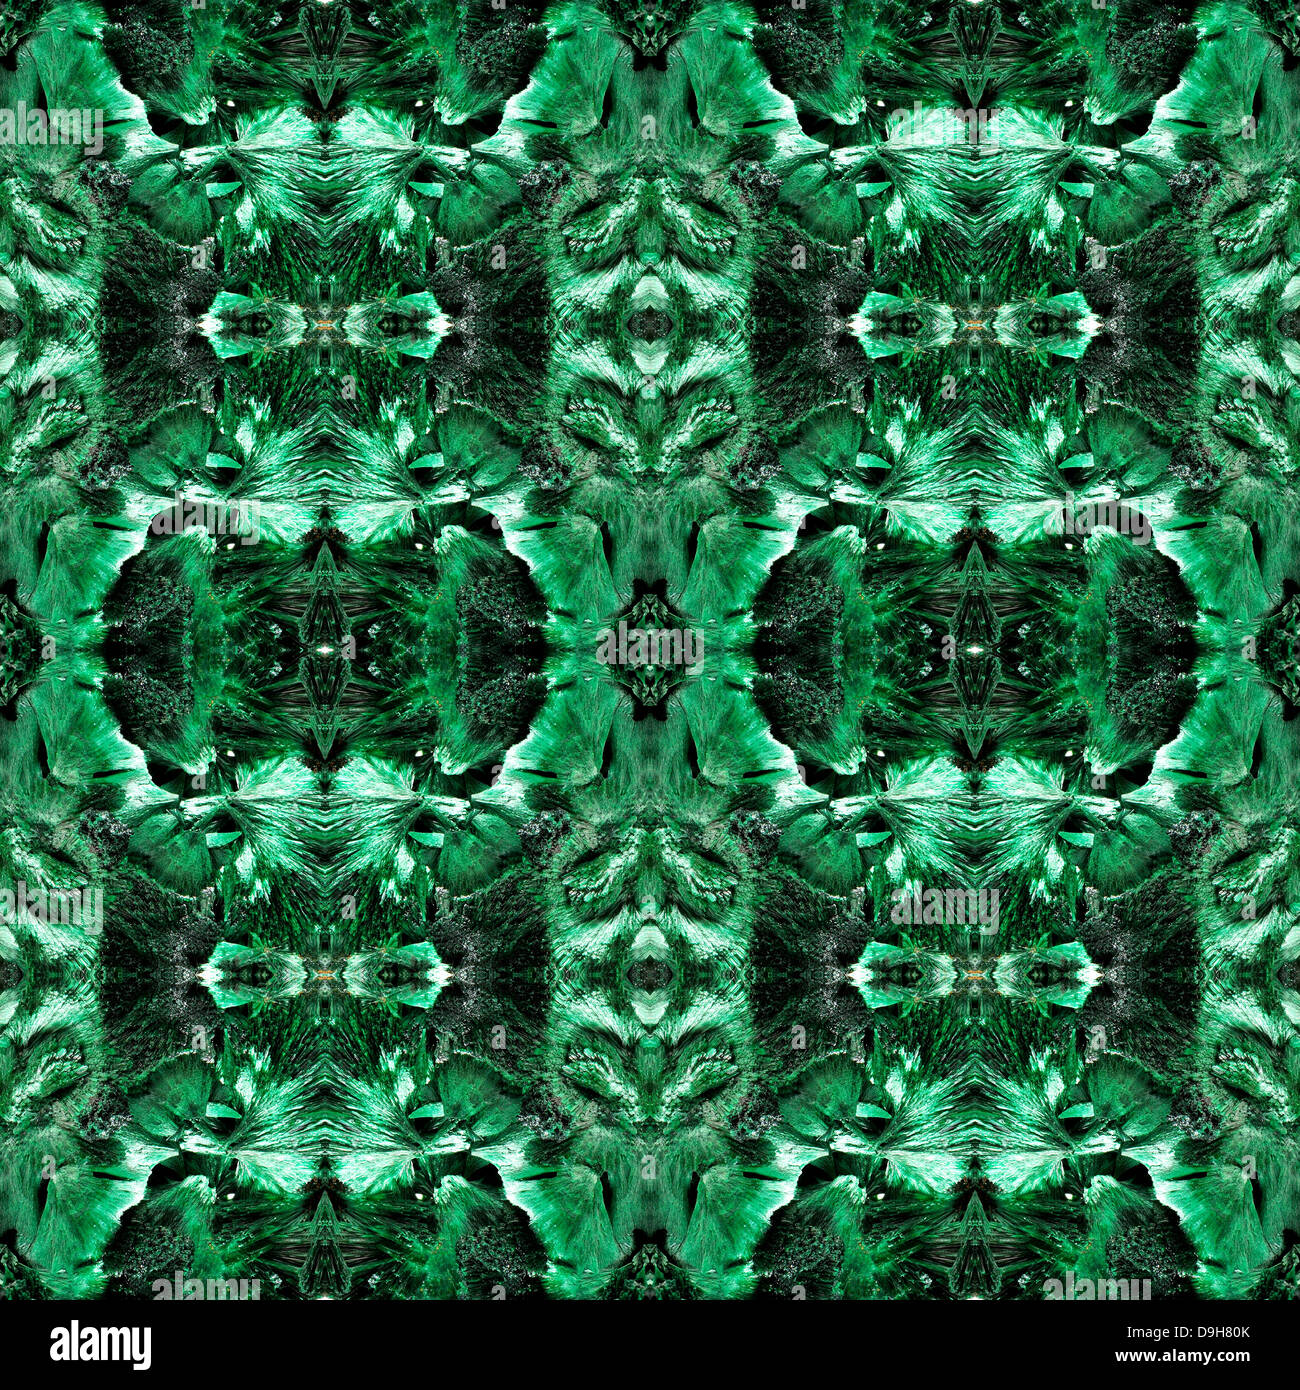 Repeated pattern made from image of Malachite Stock Photo